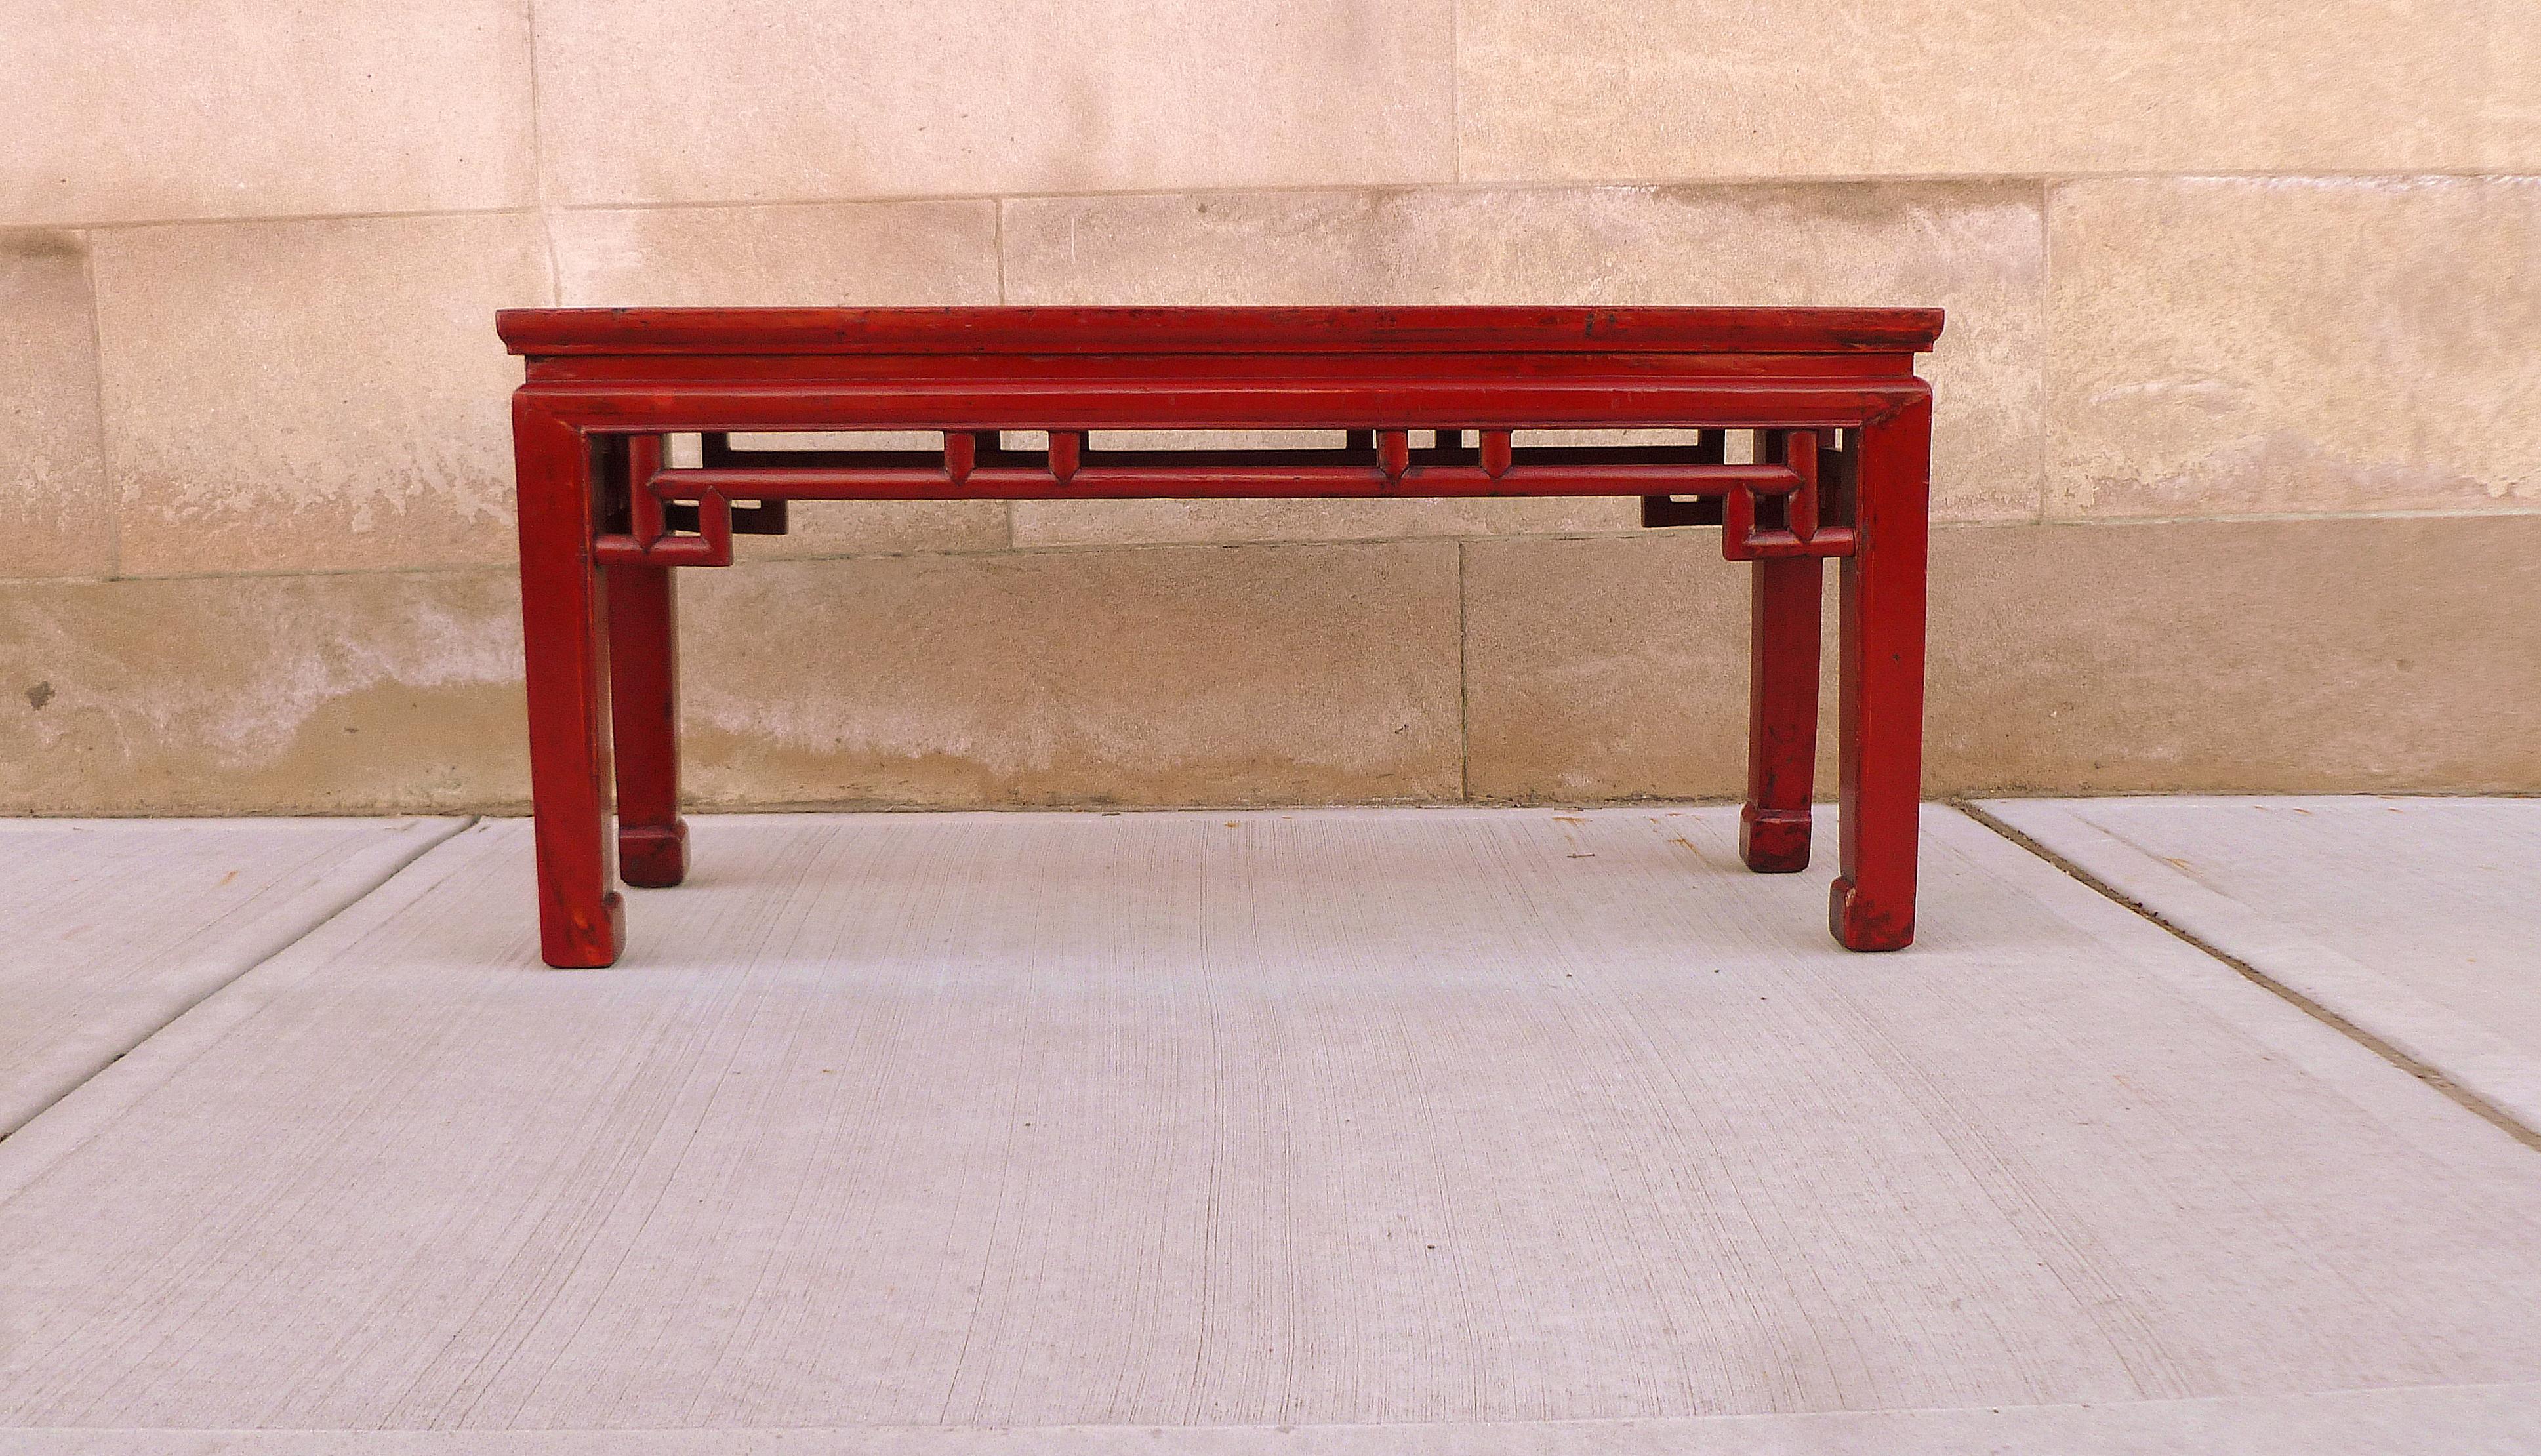 Red lacquer bench with fret work design apron. We carry fine quality furniture with elegant finished and has been appeared many times in “ARCHITECTURE DIGEST” Magazines and sold to many to Celebrities. Last “Two Photos